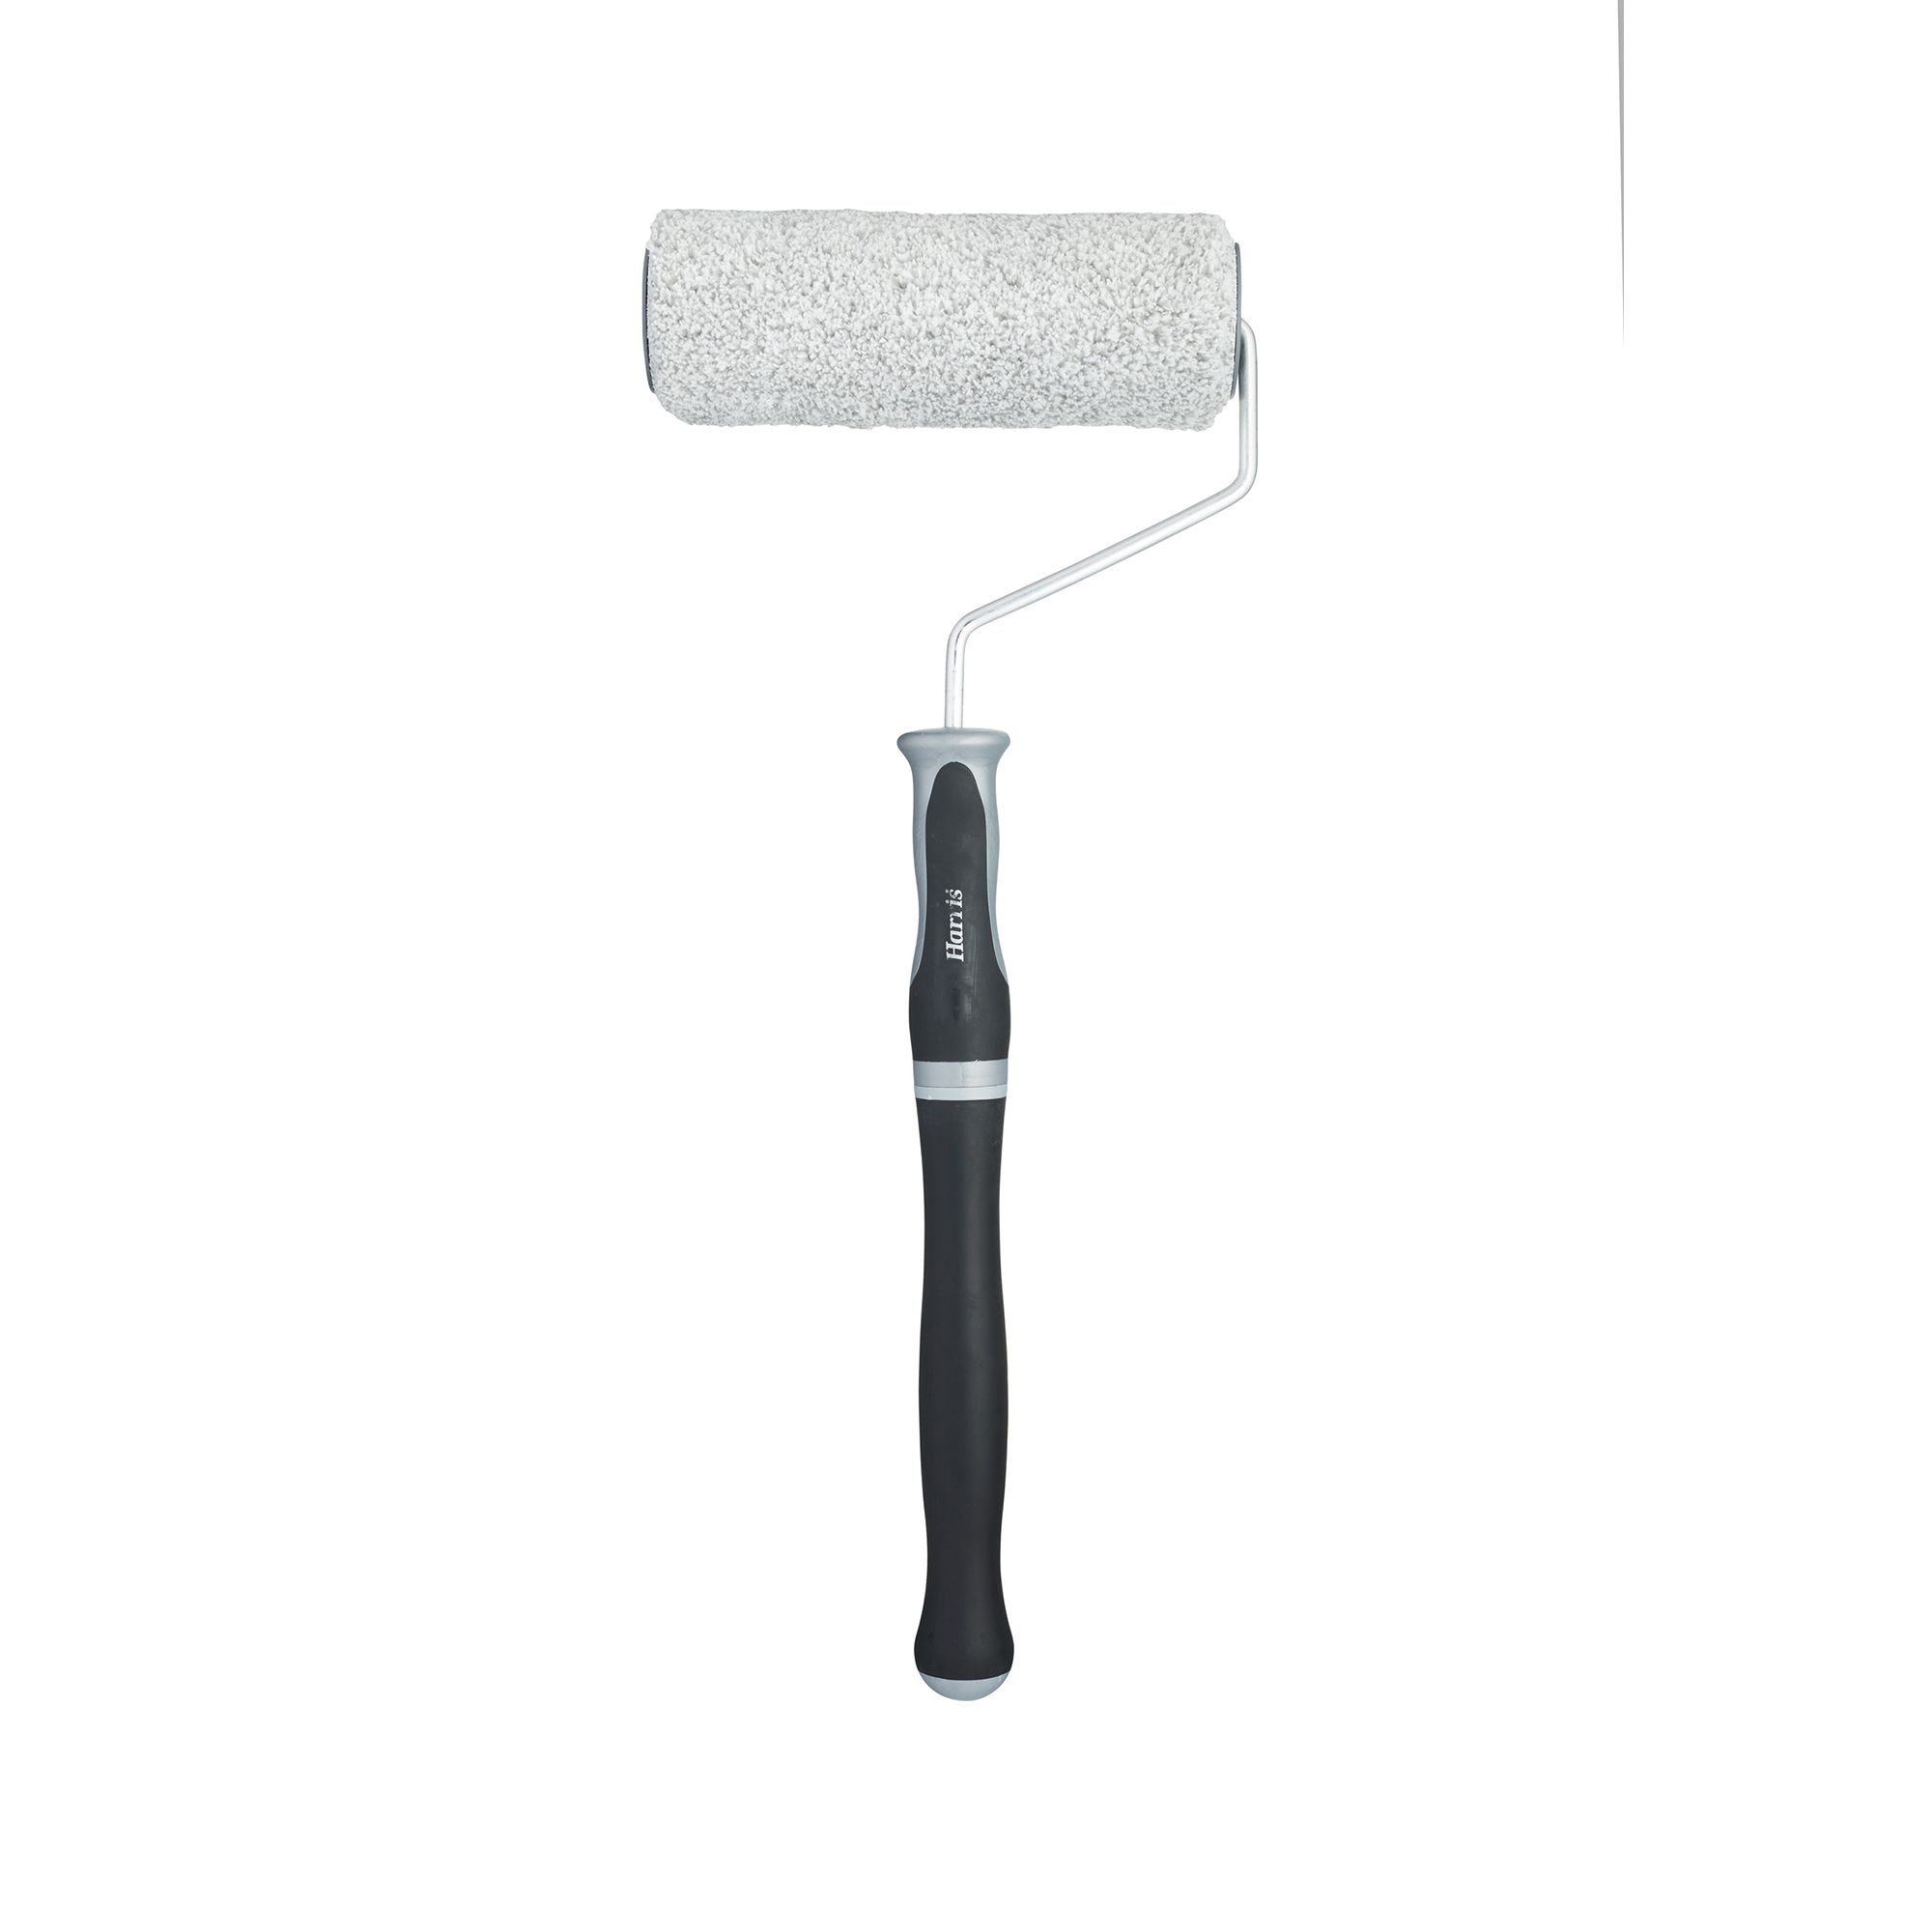 Professional Paint Roller For Painting Wall, Facade, Short Pile Paint Roller,  Renovation Kit, Painting Kit (9 Inch/with Stand)